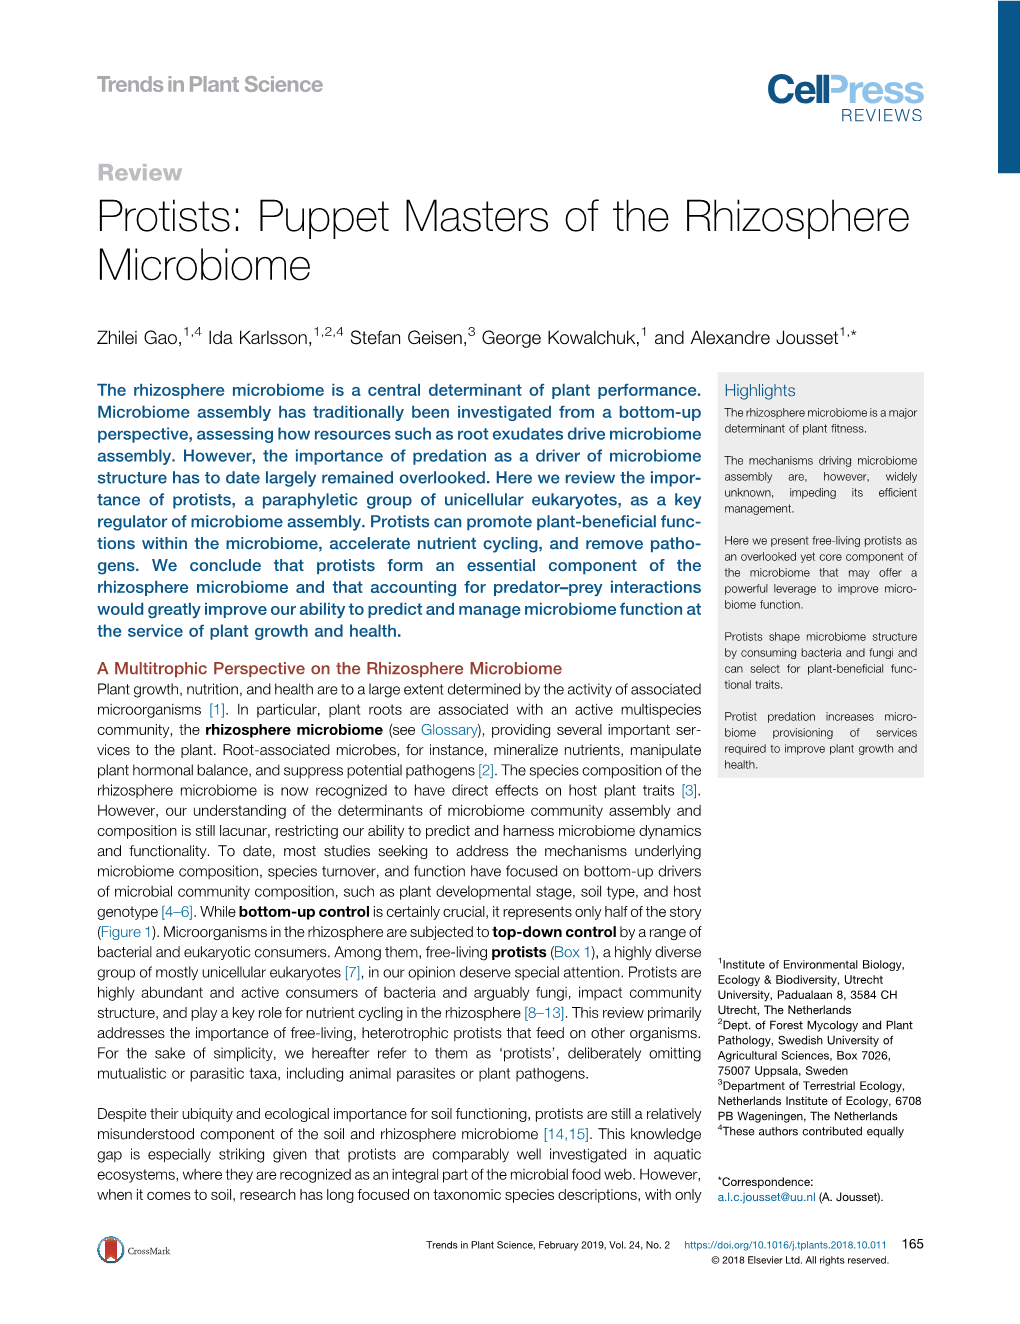 Protists: Puppet Masters of the Rhizosphere Microbiome